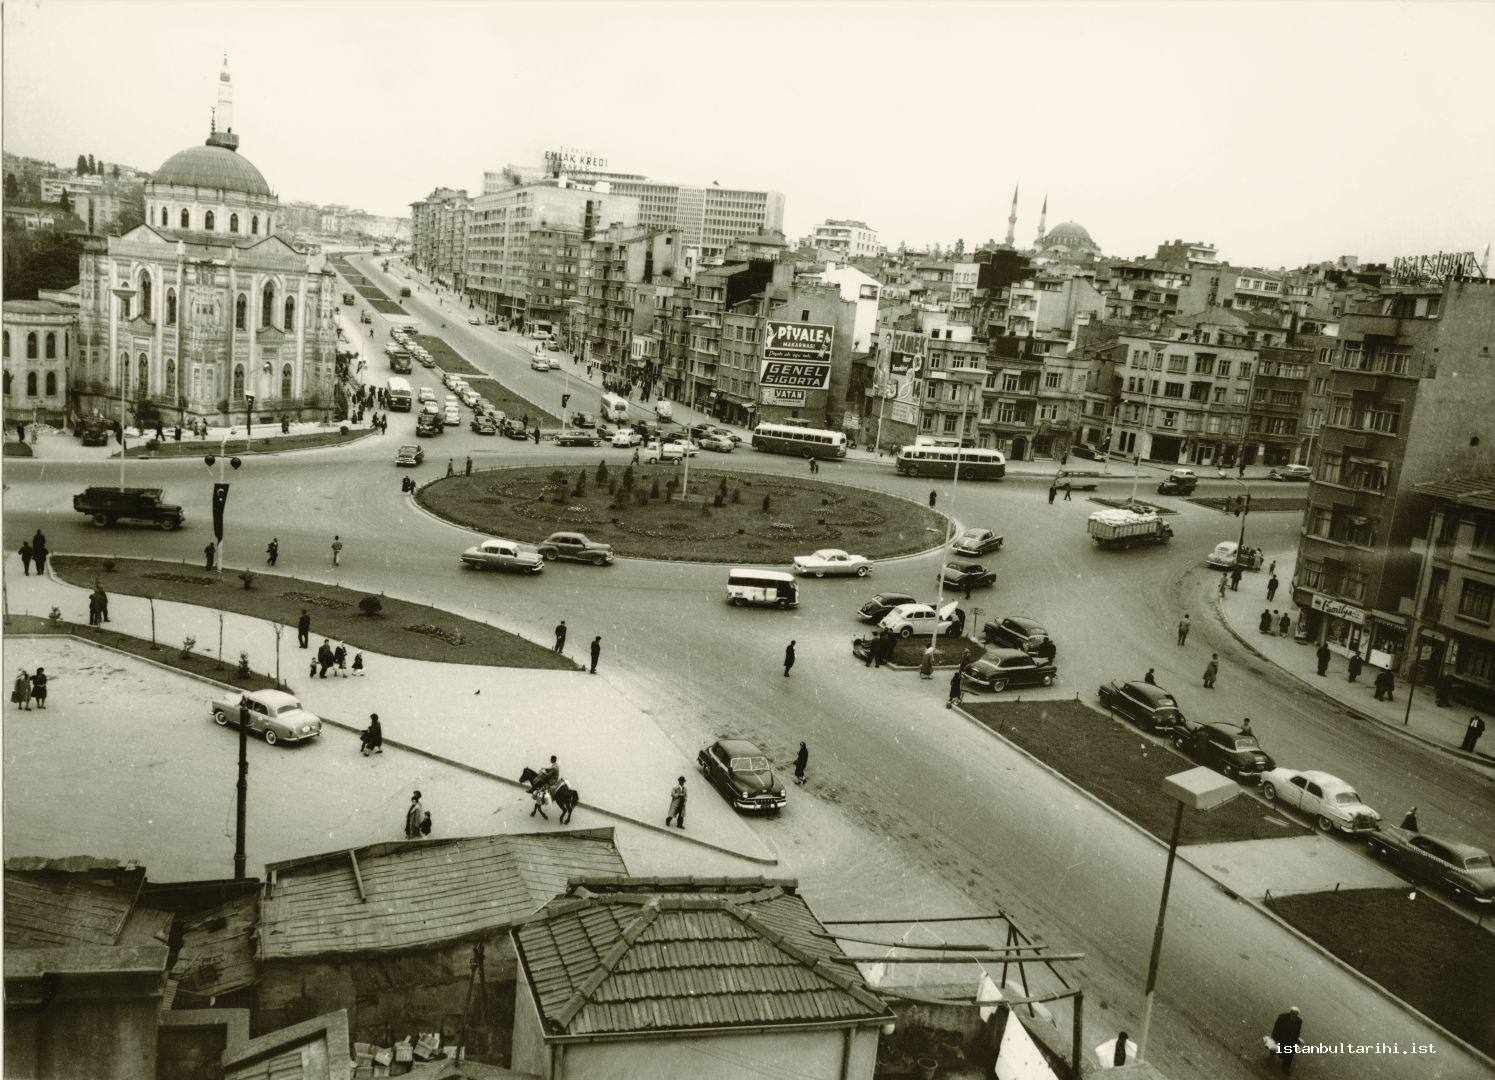 11- From Aksaray to Saraçhane… This was before Aksaray Square was turned into a functionless place by building the current over-pass.